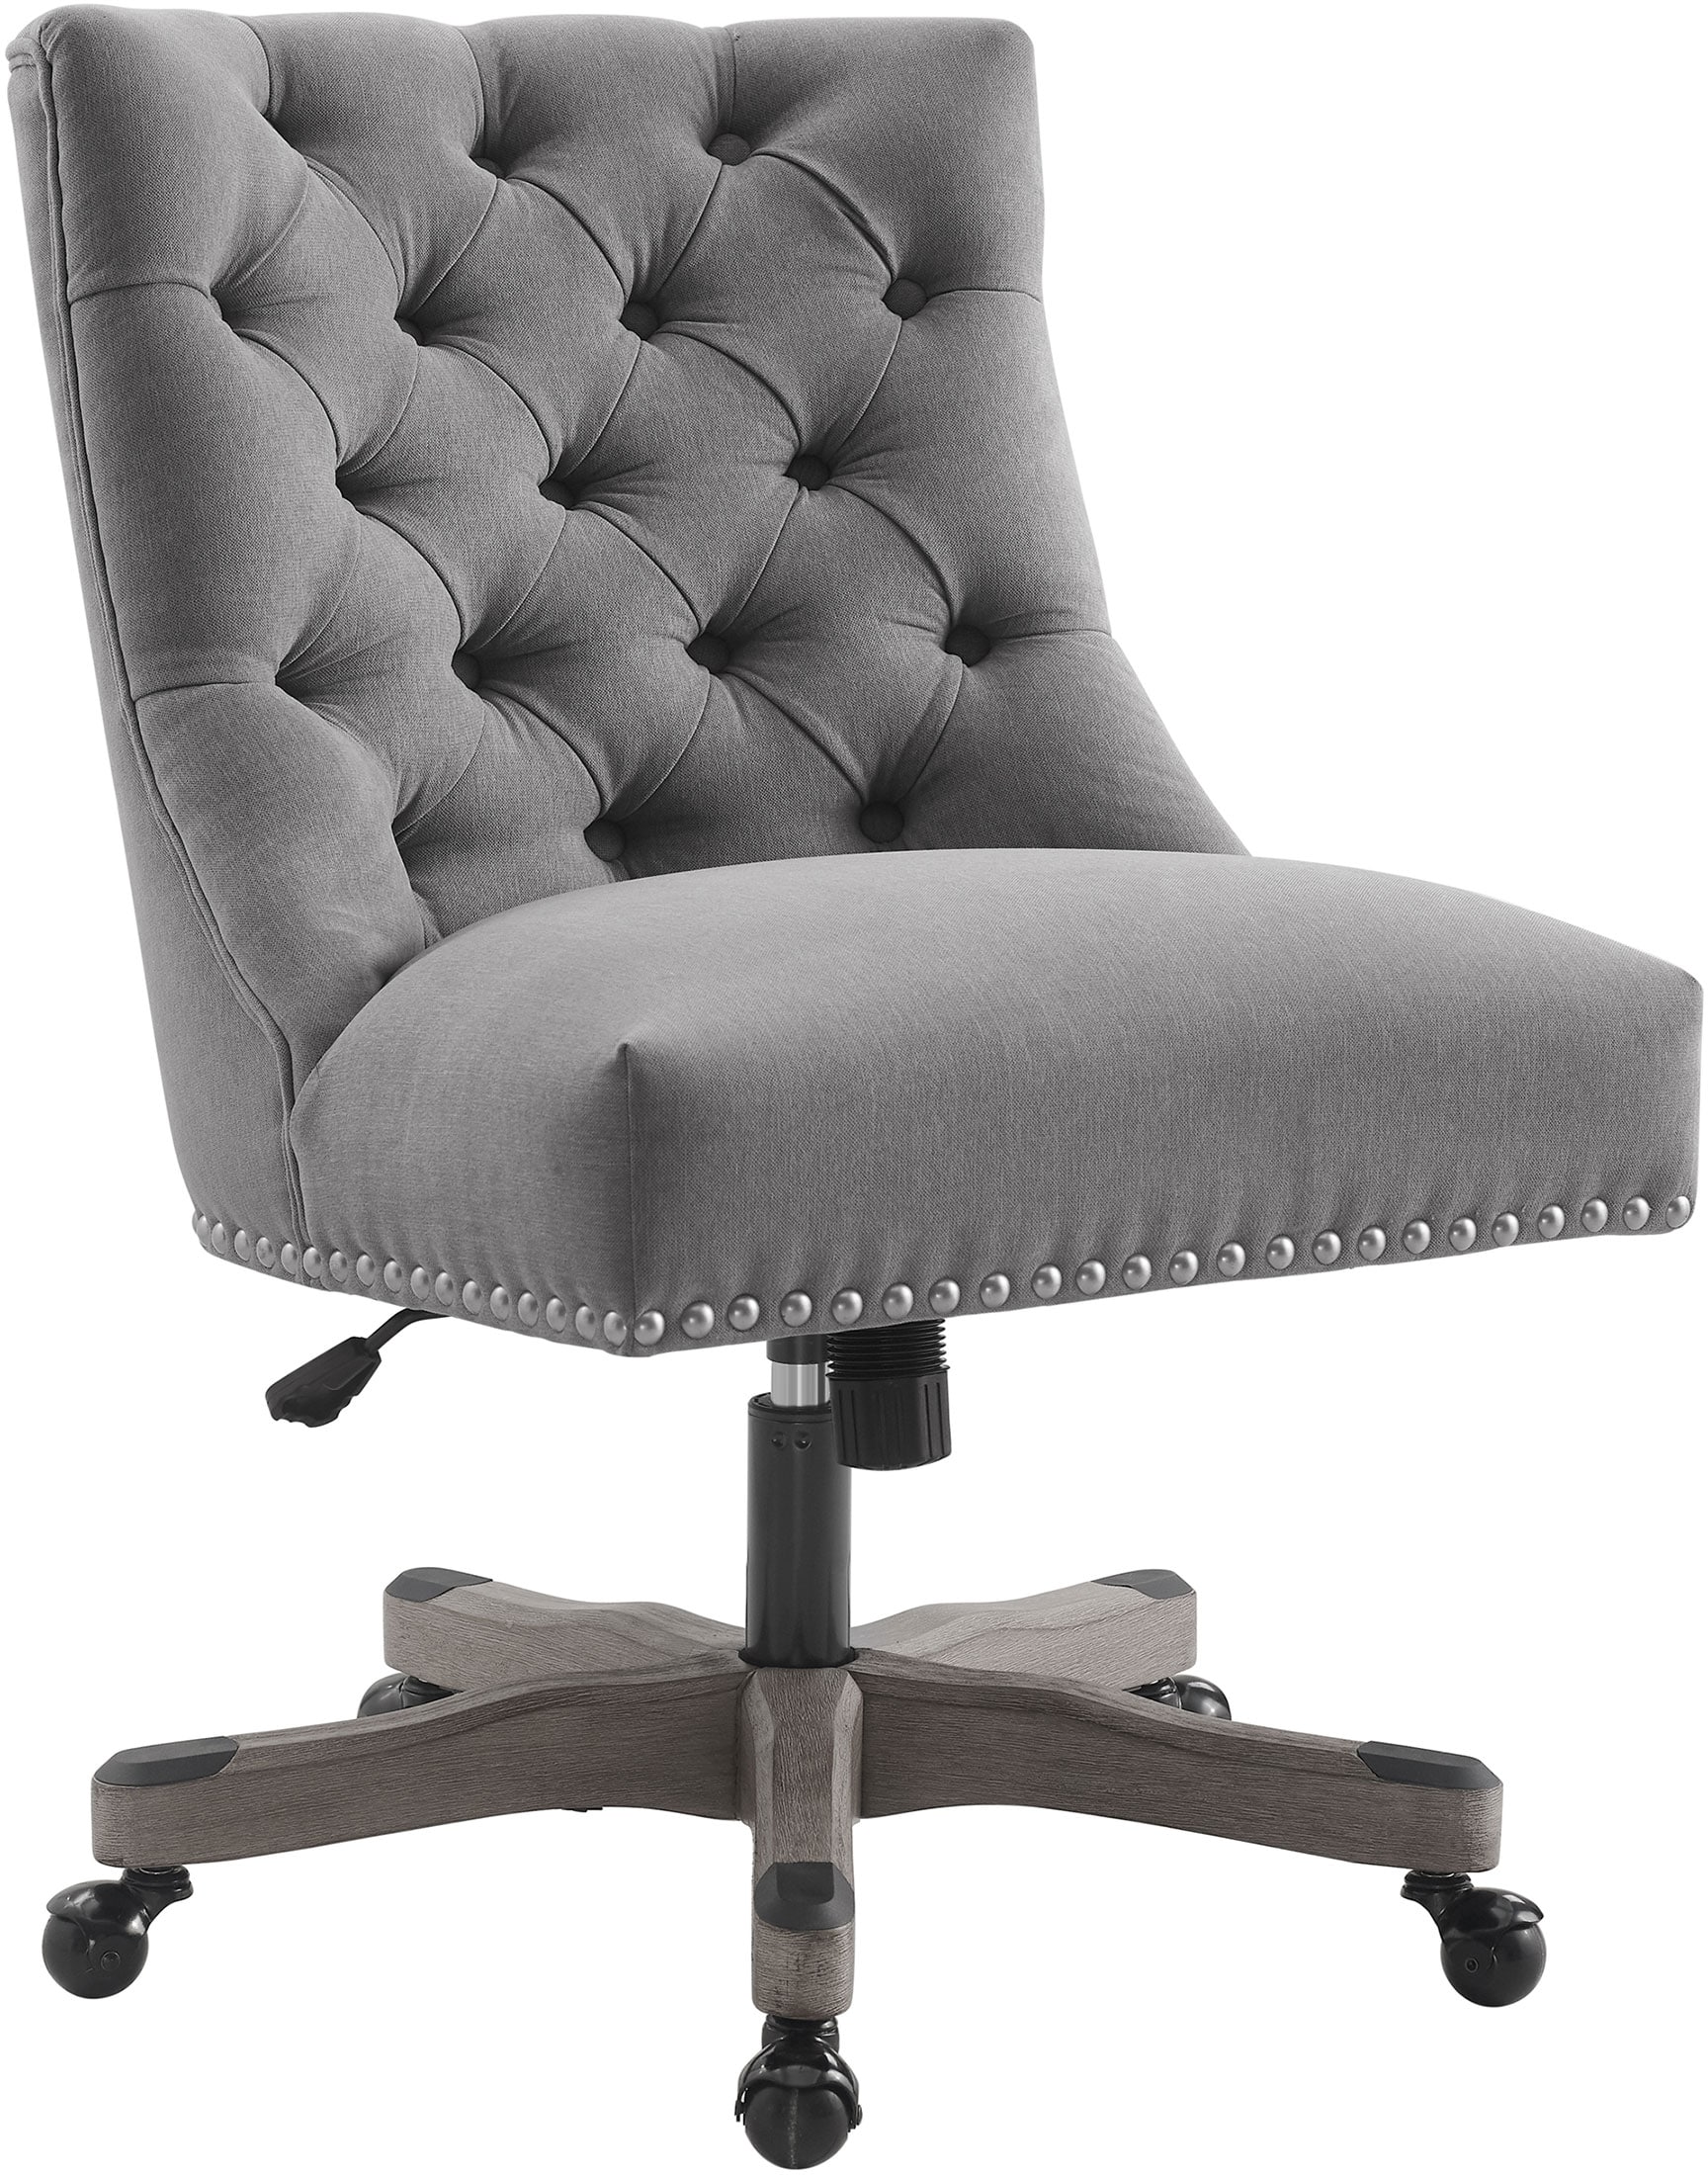 Beautyrest Desk Chair : Office Desk Chairs Costco / Task chair is a